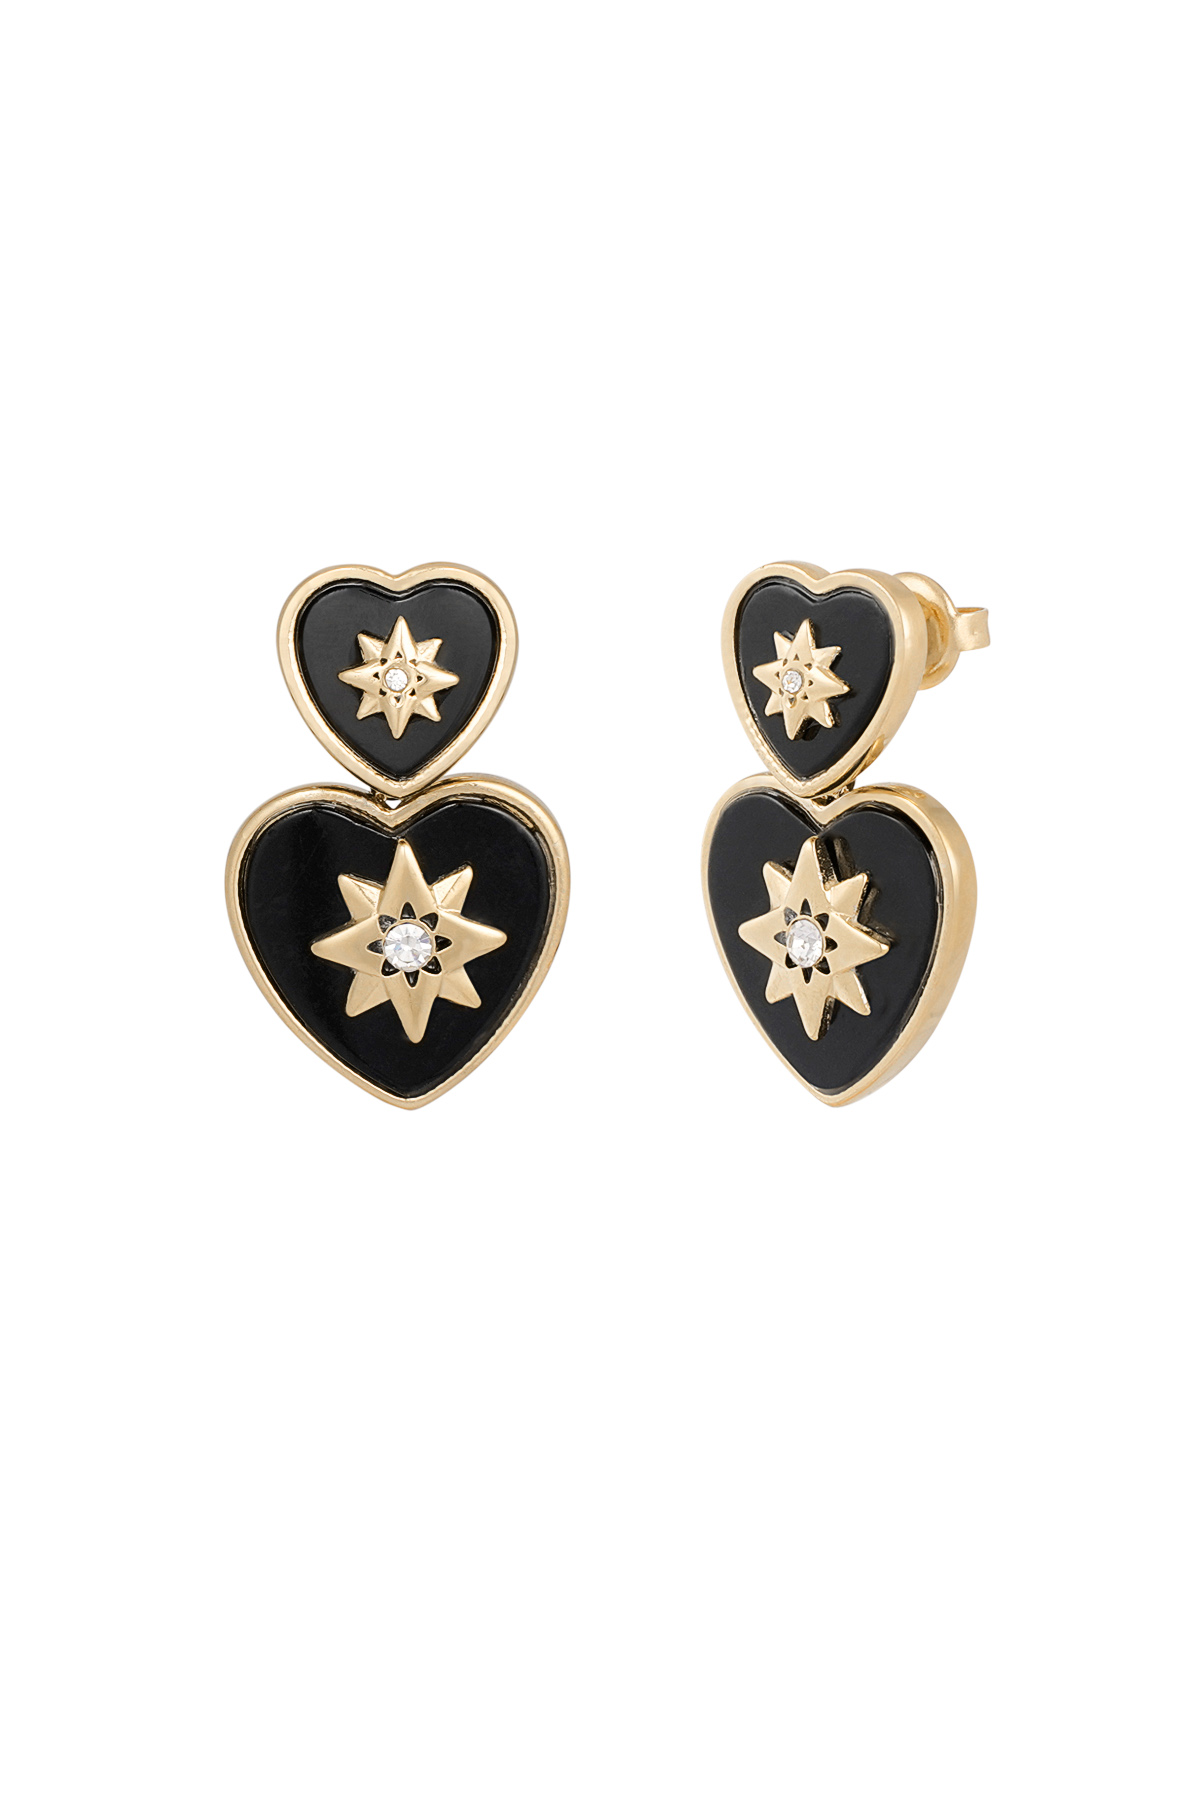 Heart earrings with compass - black gold 